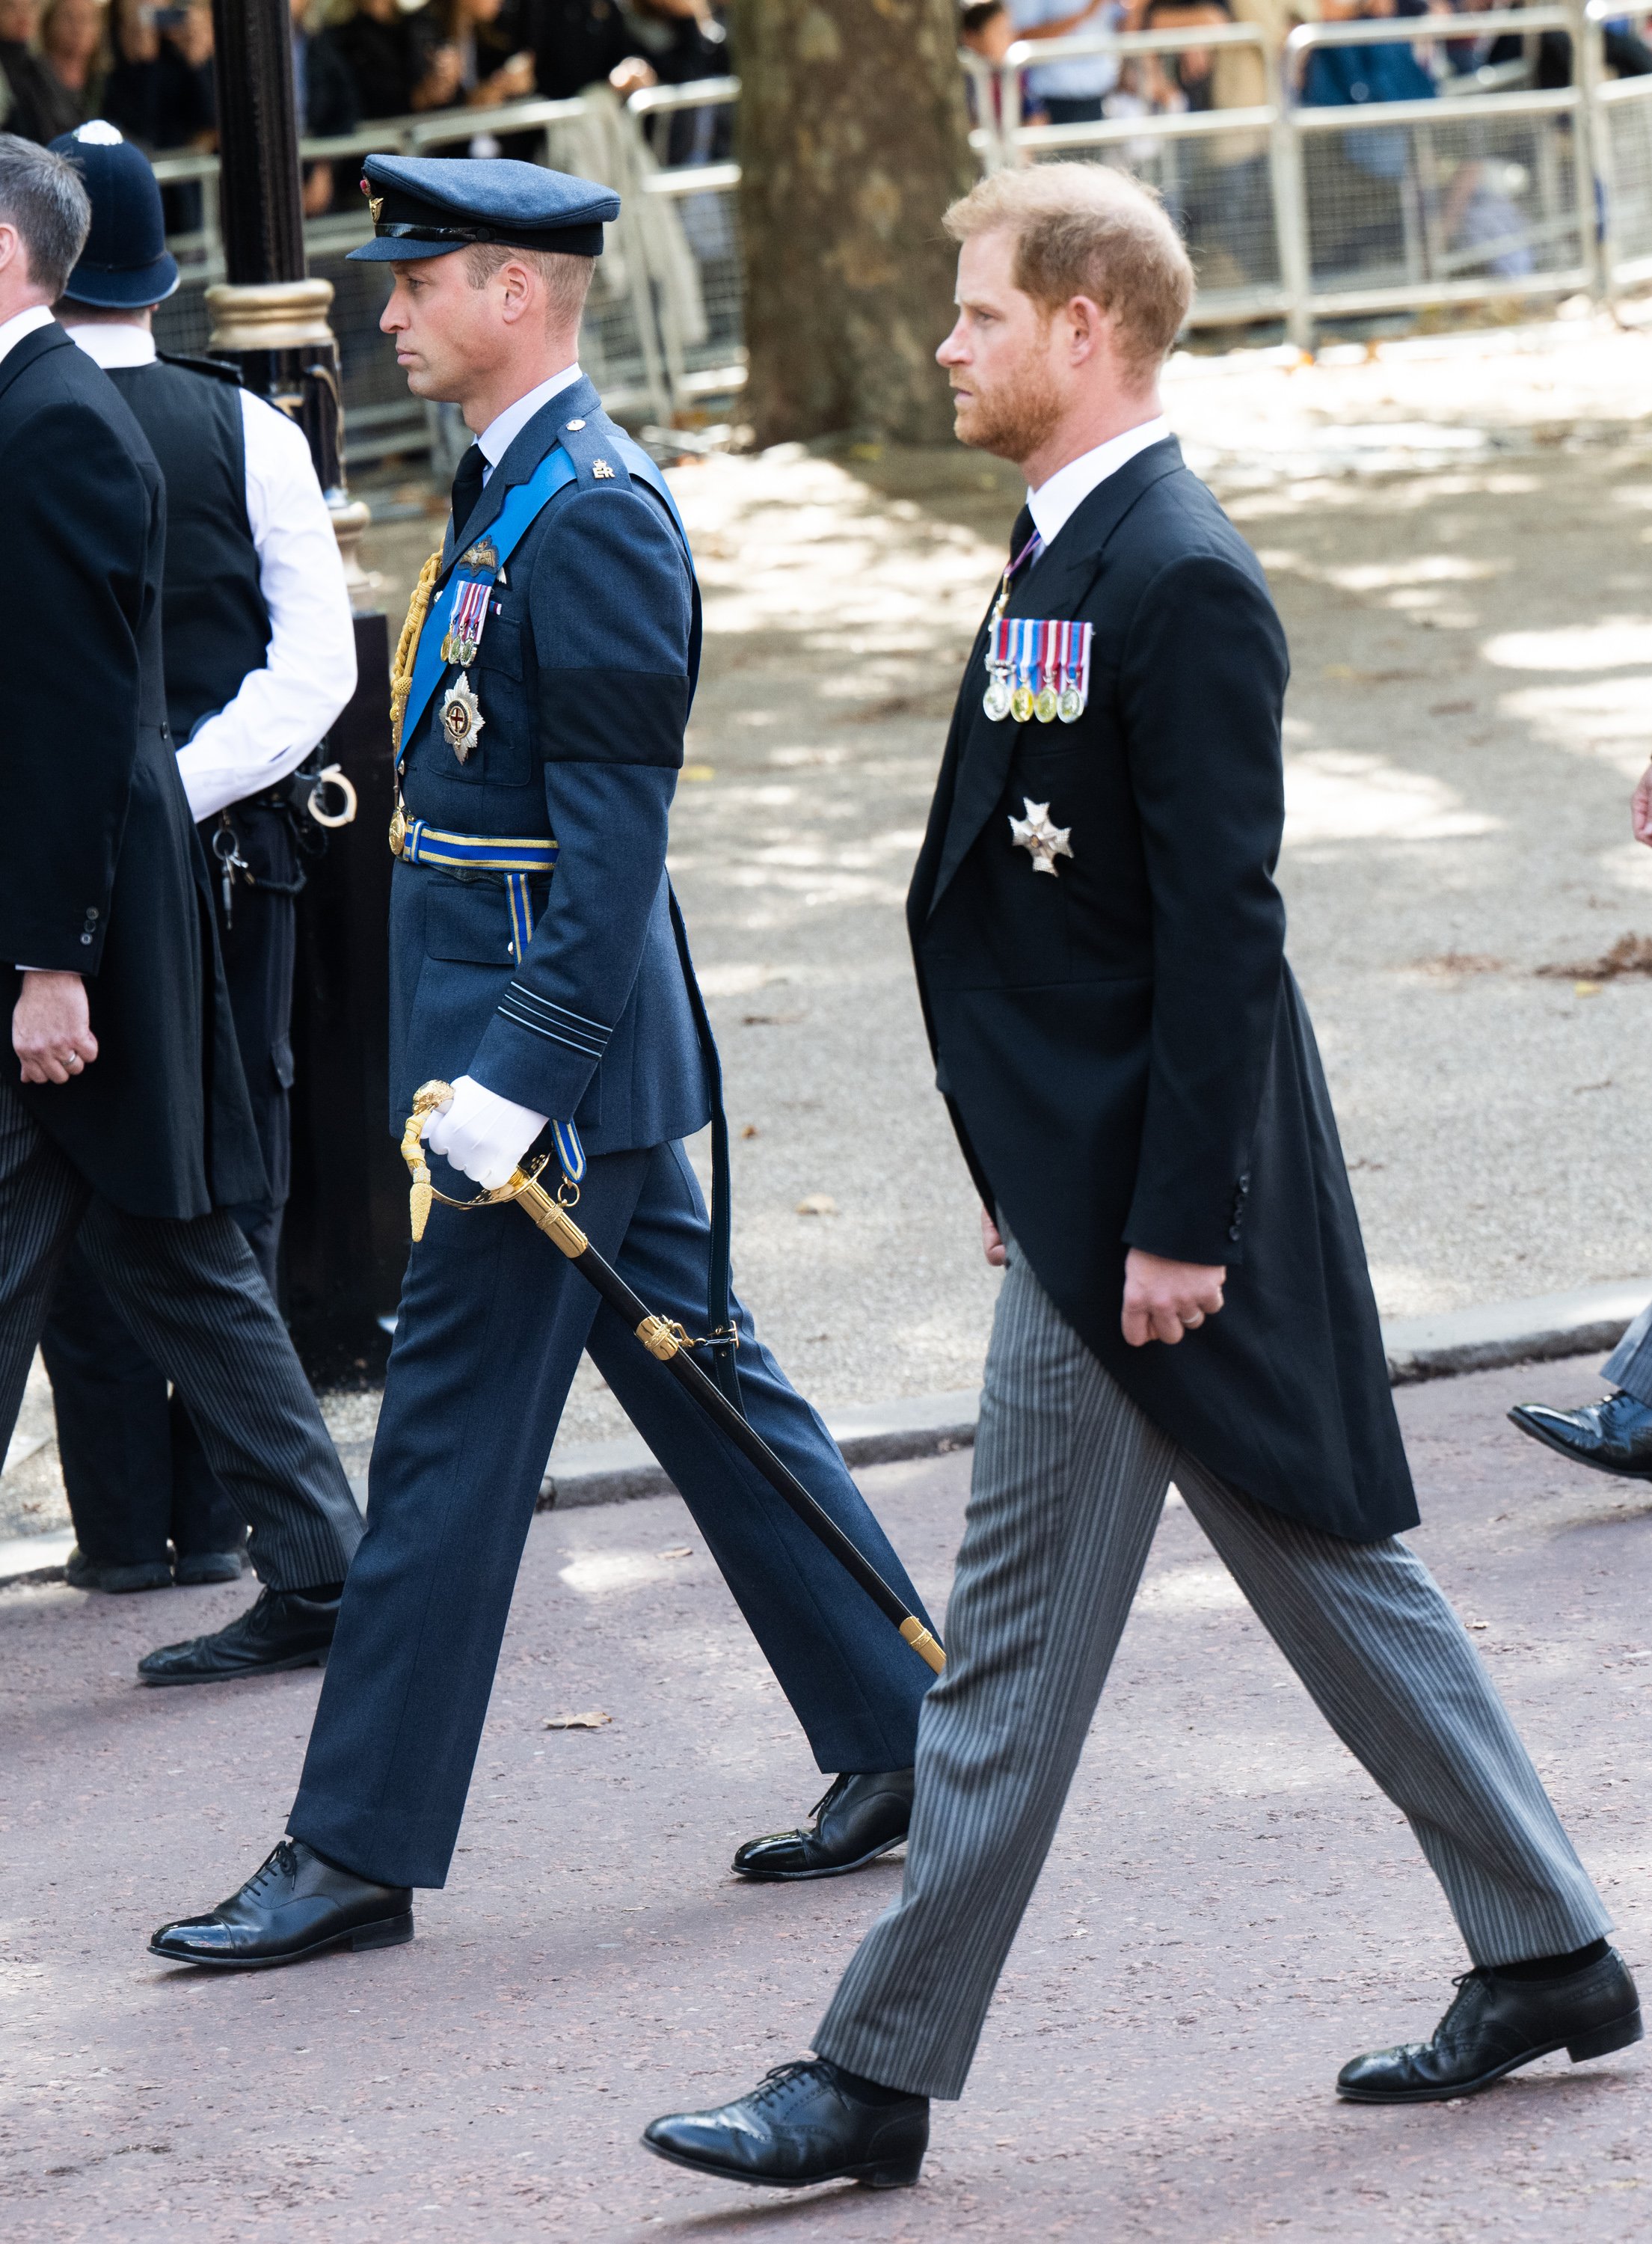 Prince William and Prince Harry walk behind Queen Elizabeth II's coffin on September 14, 2022 in London, England. | Source: Getty Images